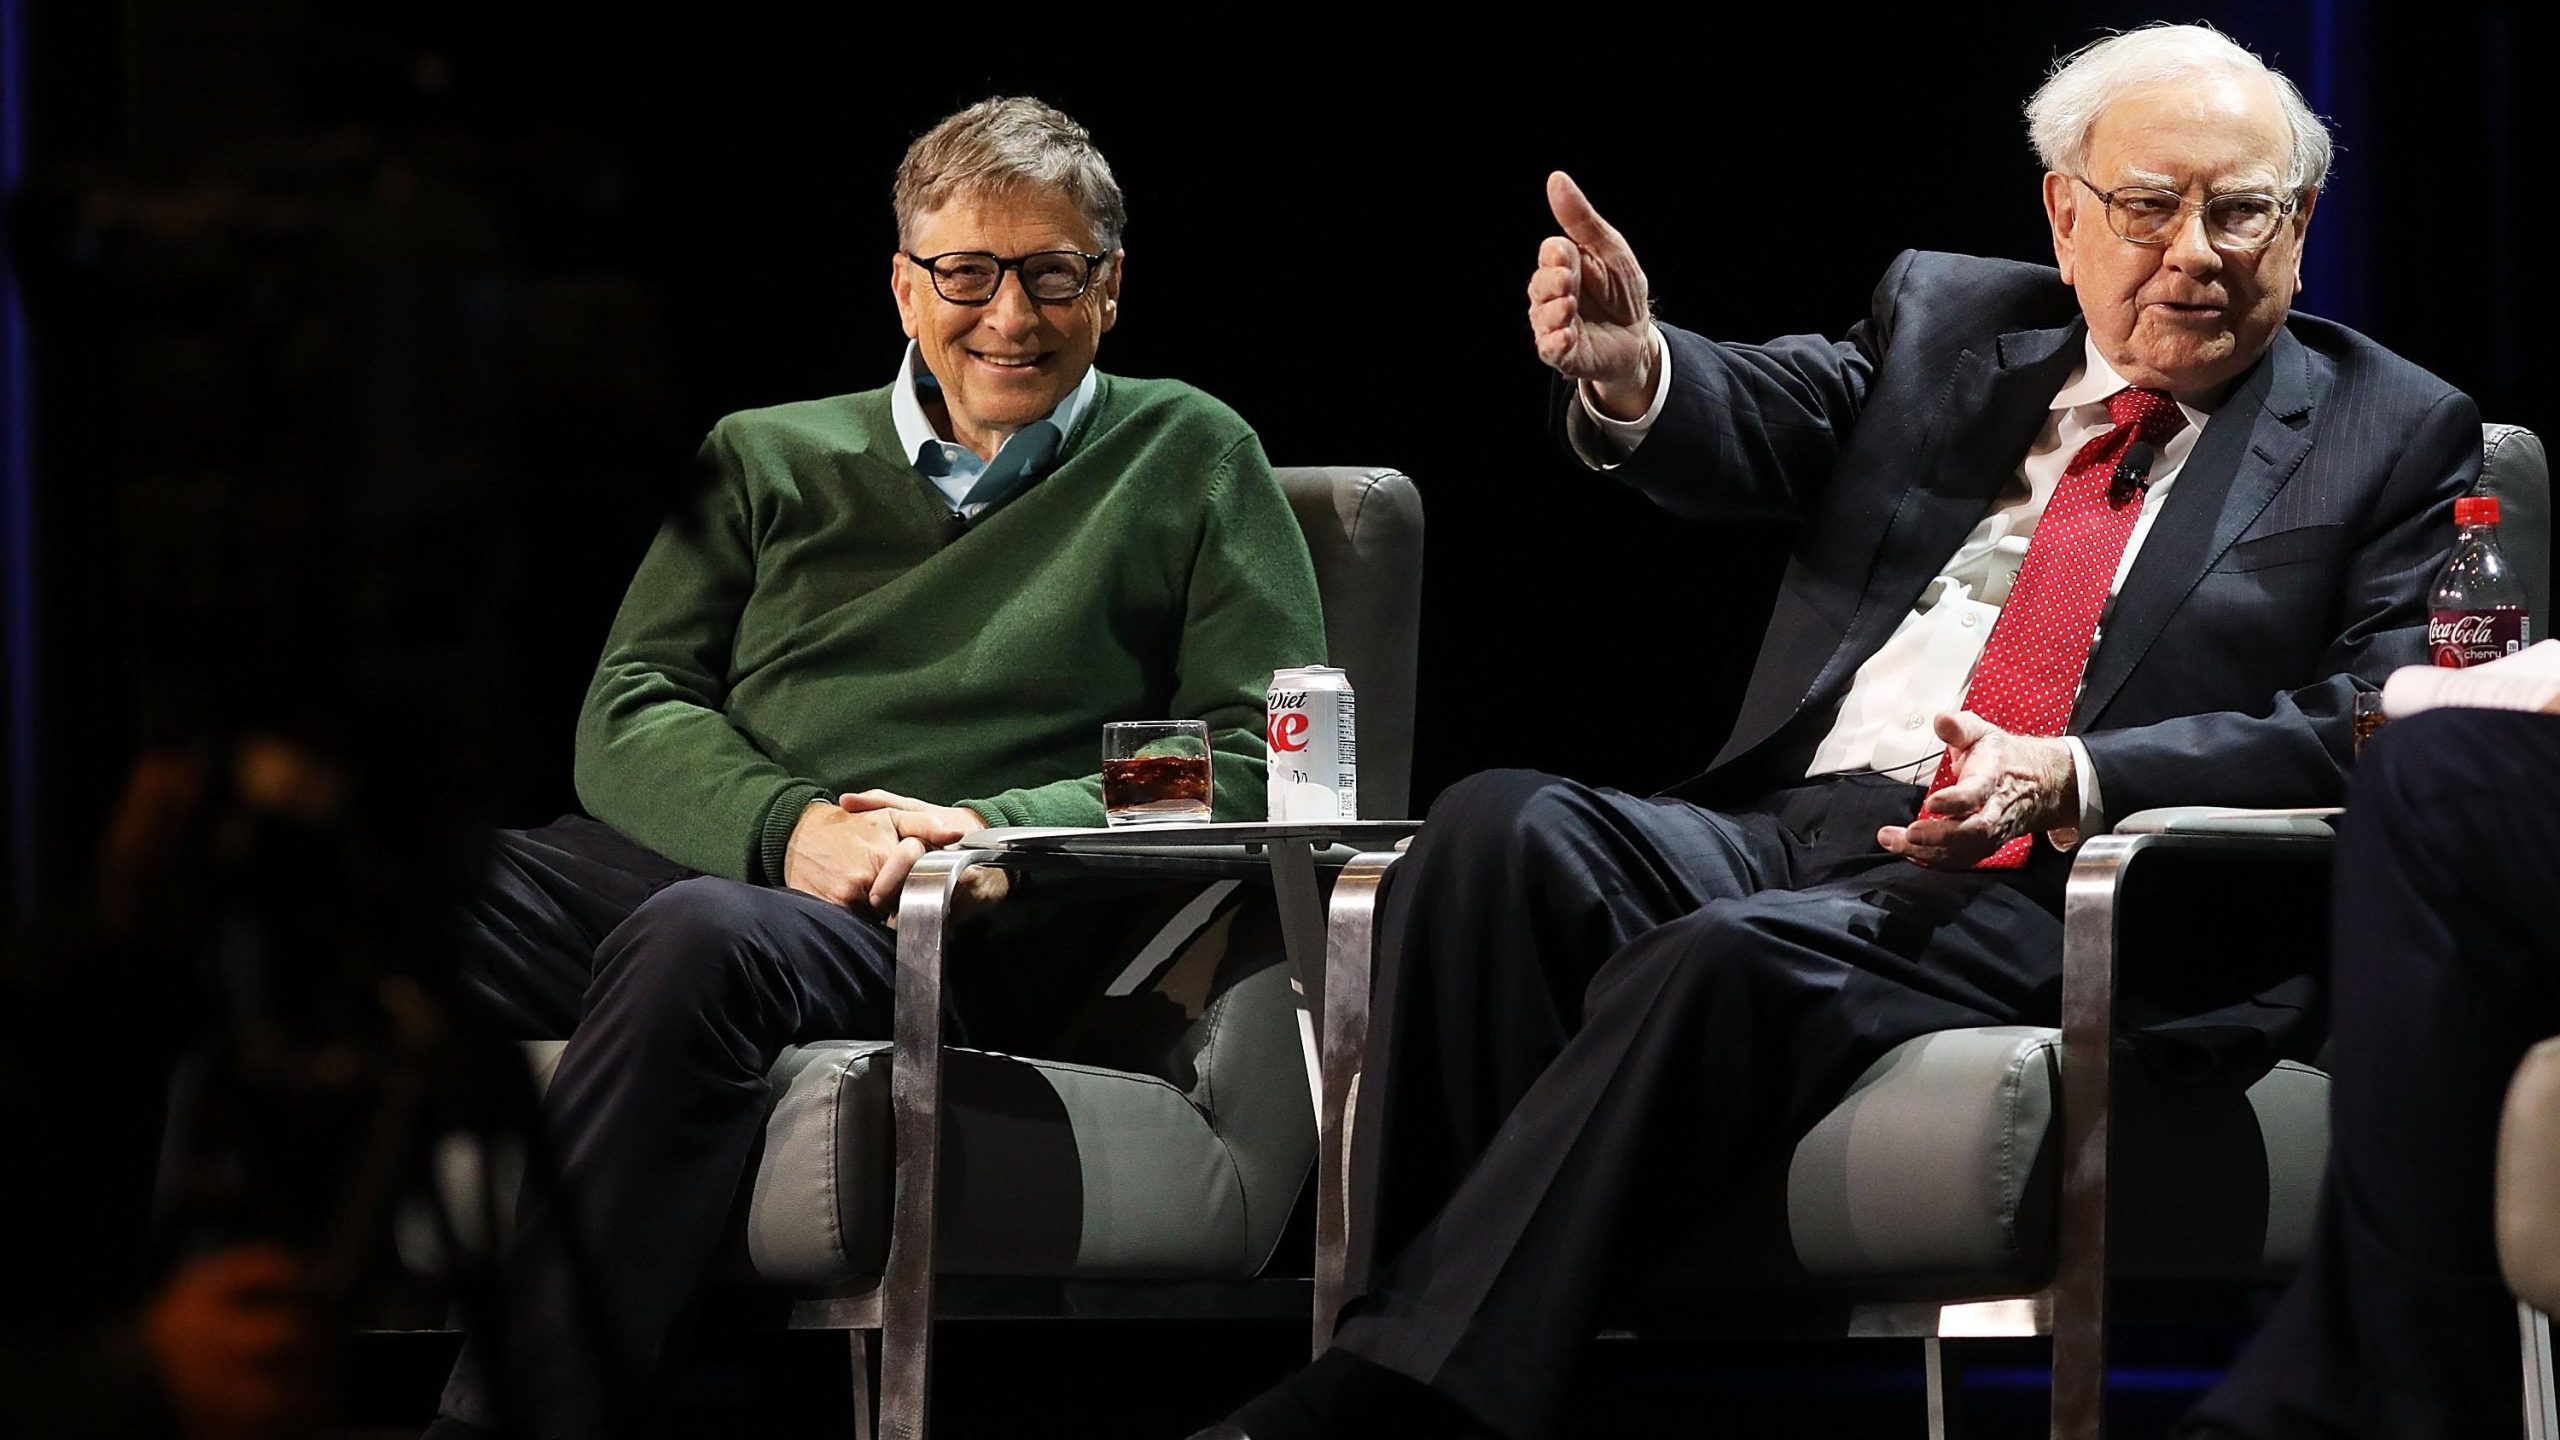 If Bill Gates donates so much of his money, how is he still one of the top three richest people in the world? 59